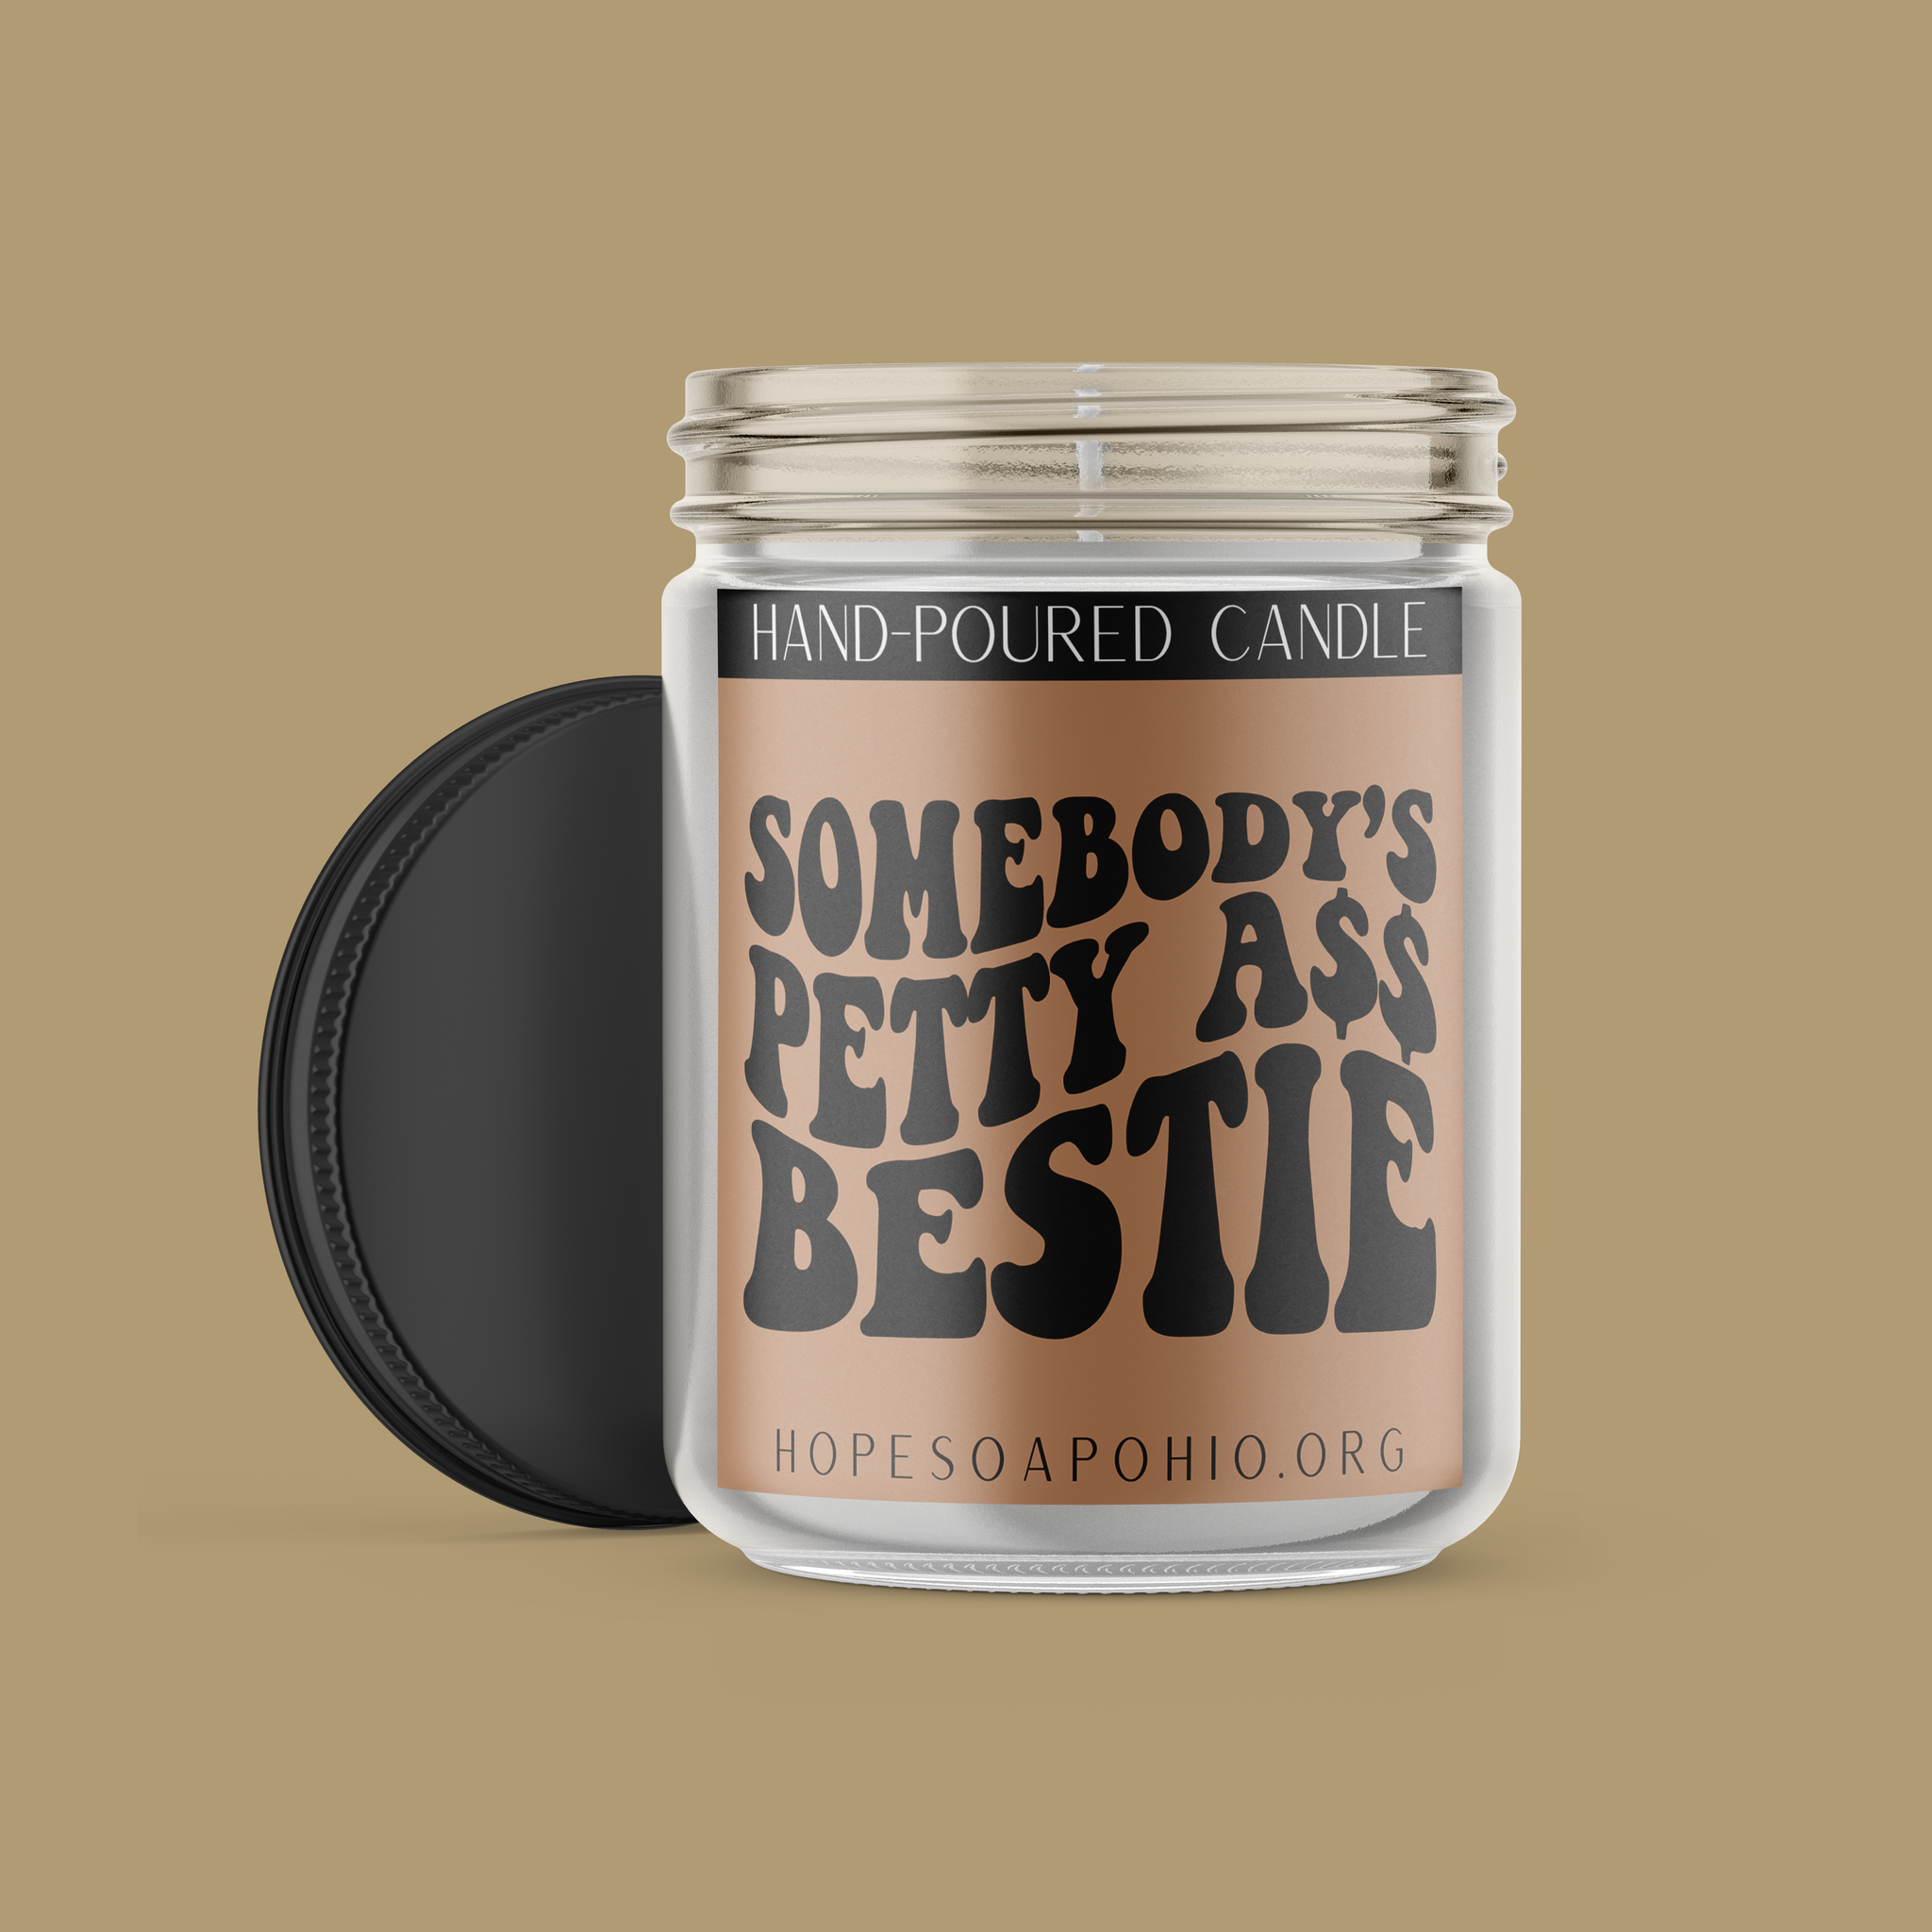 Somebody's Petty Ass Bestie Candle - HOPESOAPOHIO